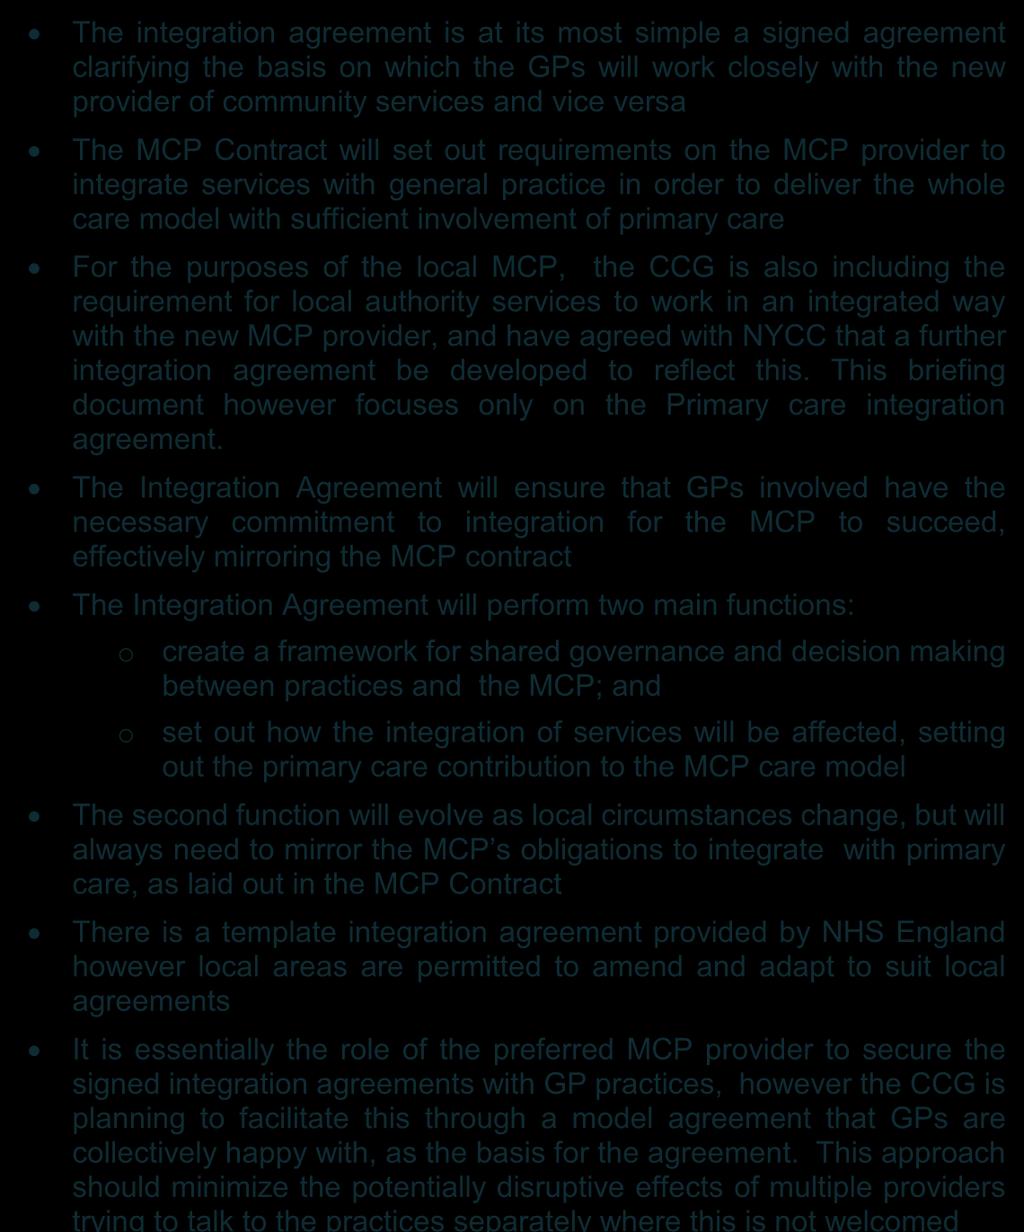 MCP Contract will set out requirements on the MCP provider to integrate services with general practice in order to deliver the whole care model with sufficient involvement of primary care For the